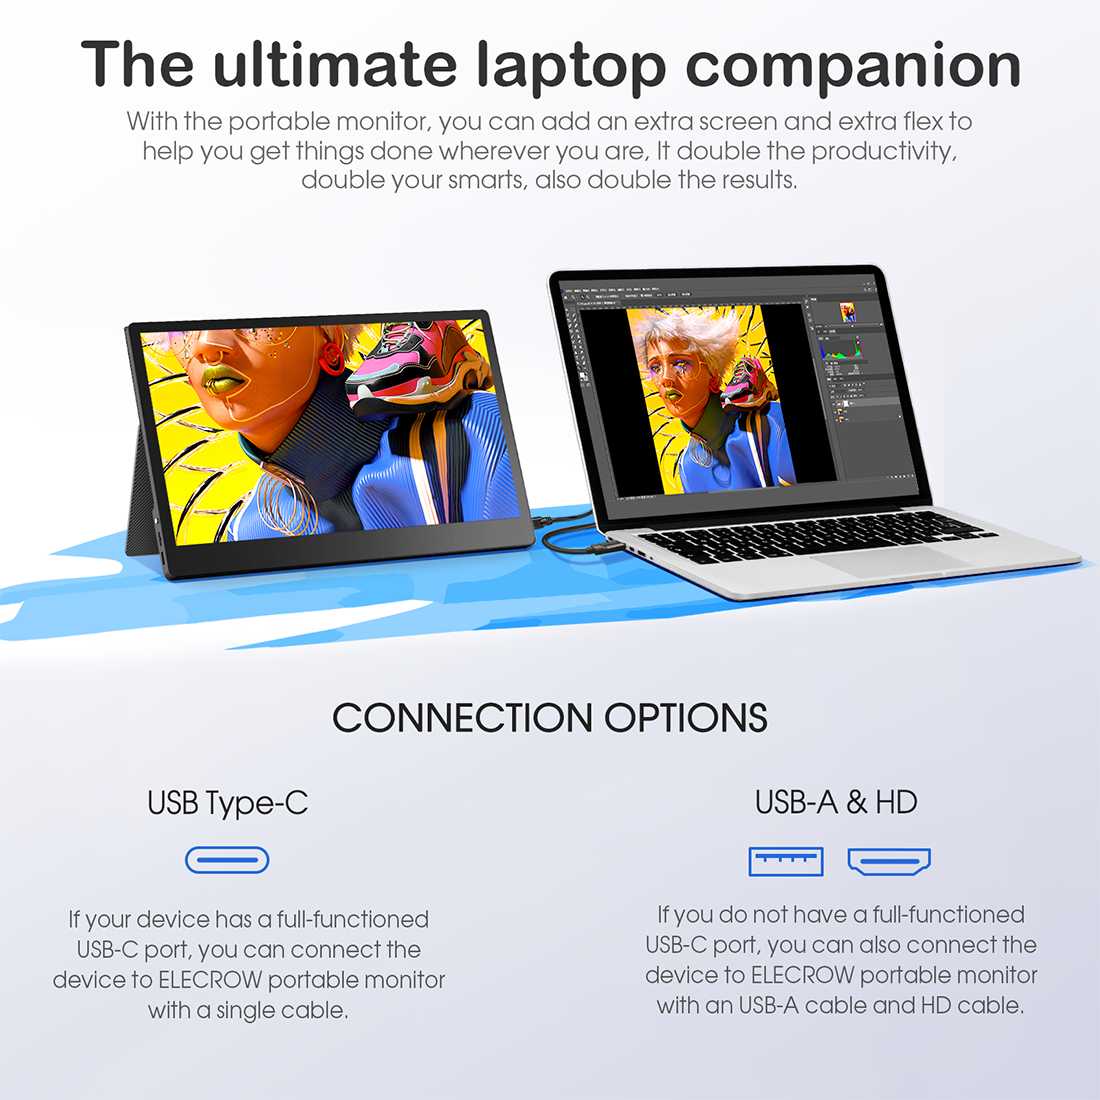 two connection options of portable monitor